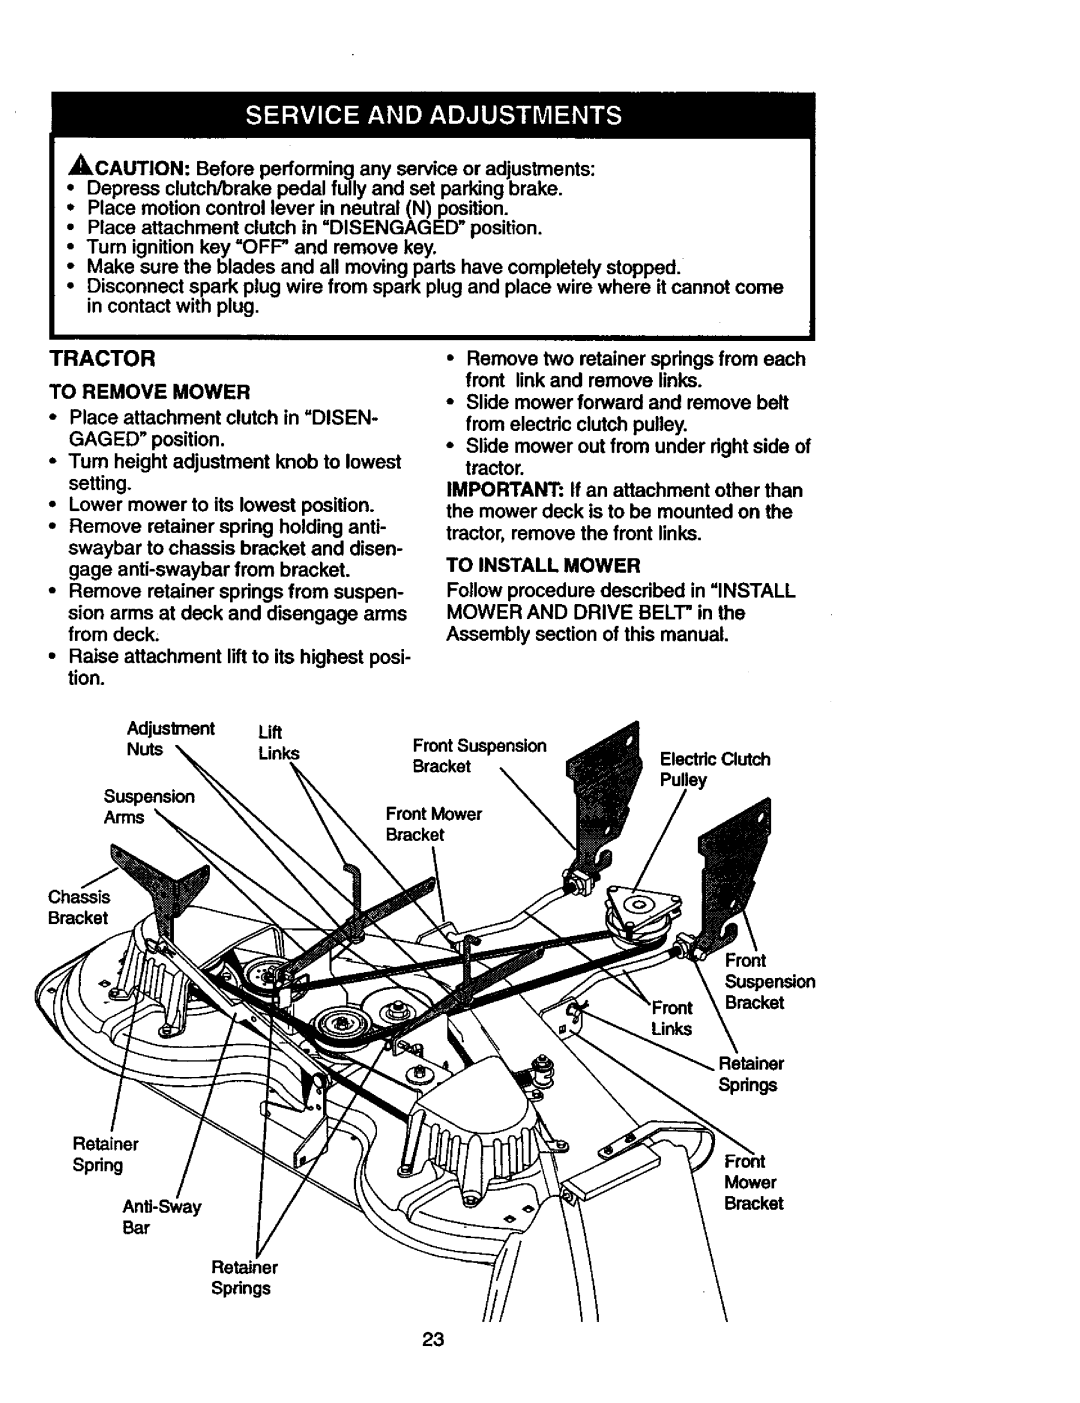 Craftsman 917.27306 AdiusVnent, Lift, Tractor To Remove Mower, To Install Mower, Assembly section of this manual 